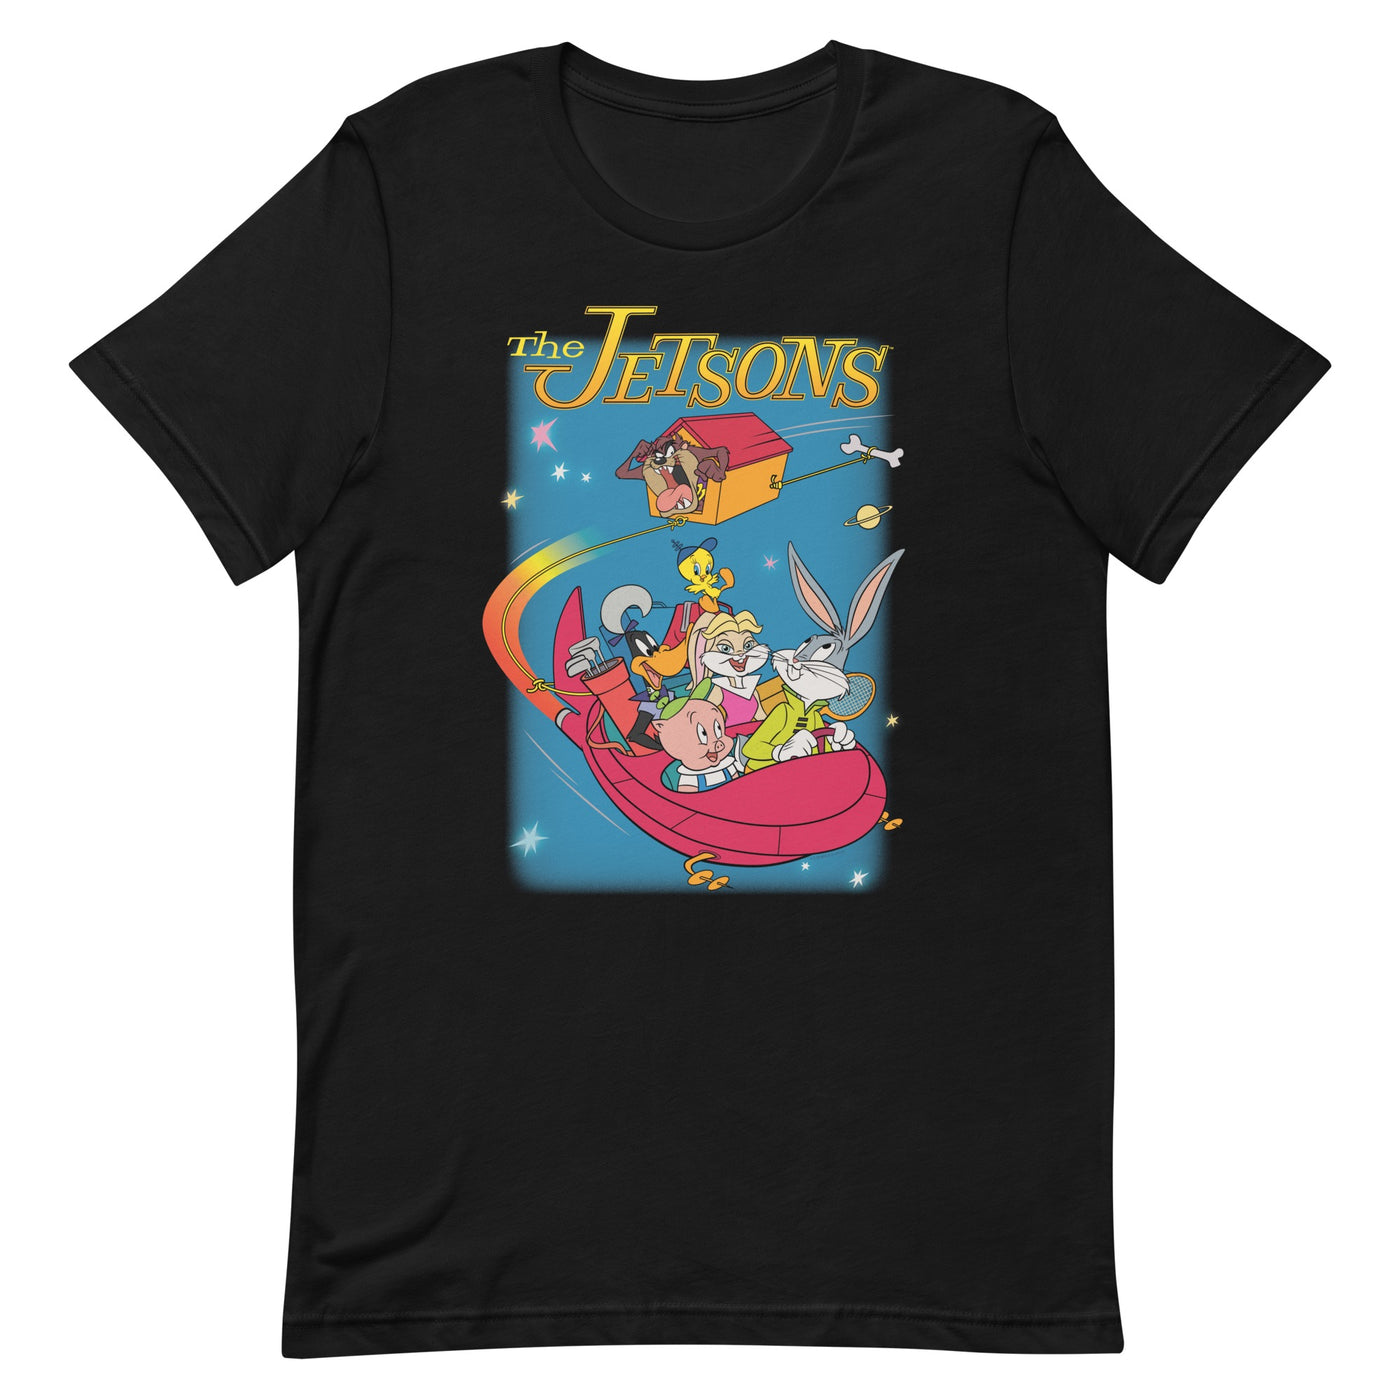 Looney Tunes x The Jetsons Mash-up T-shirt